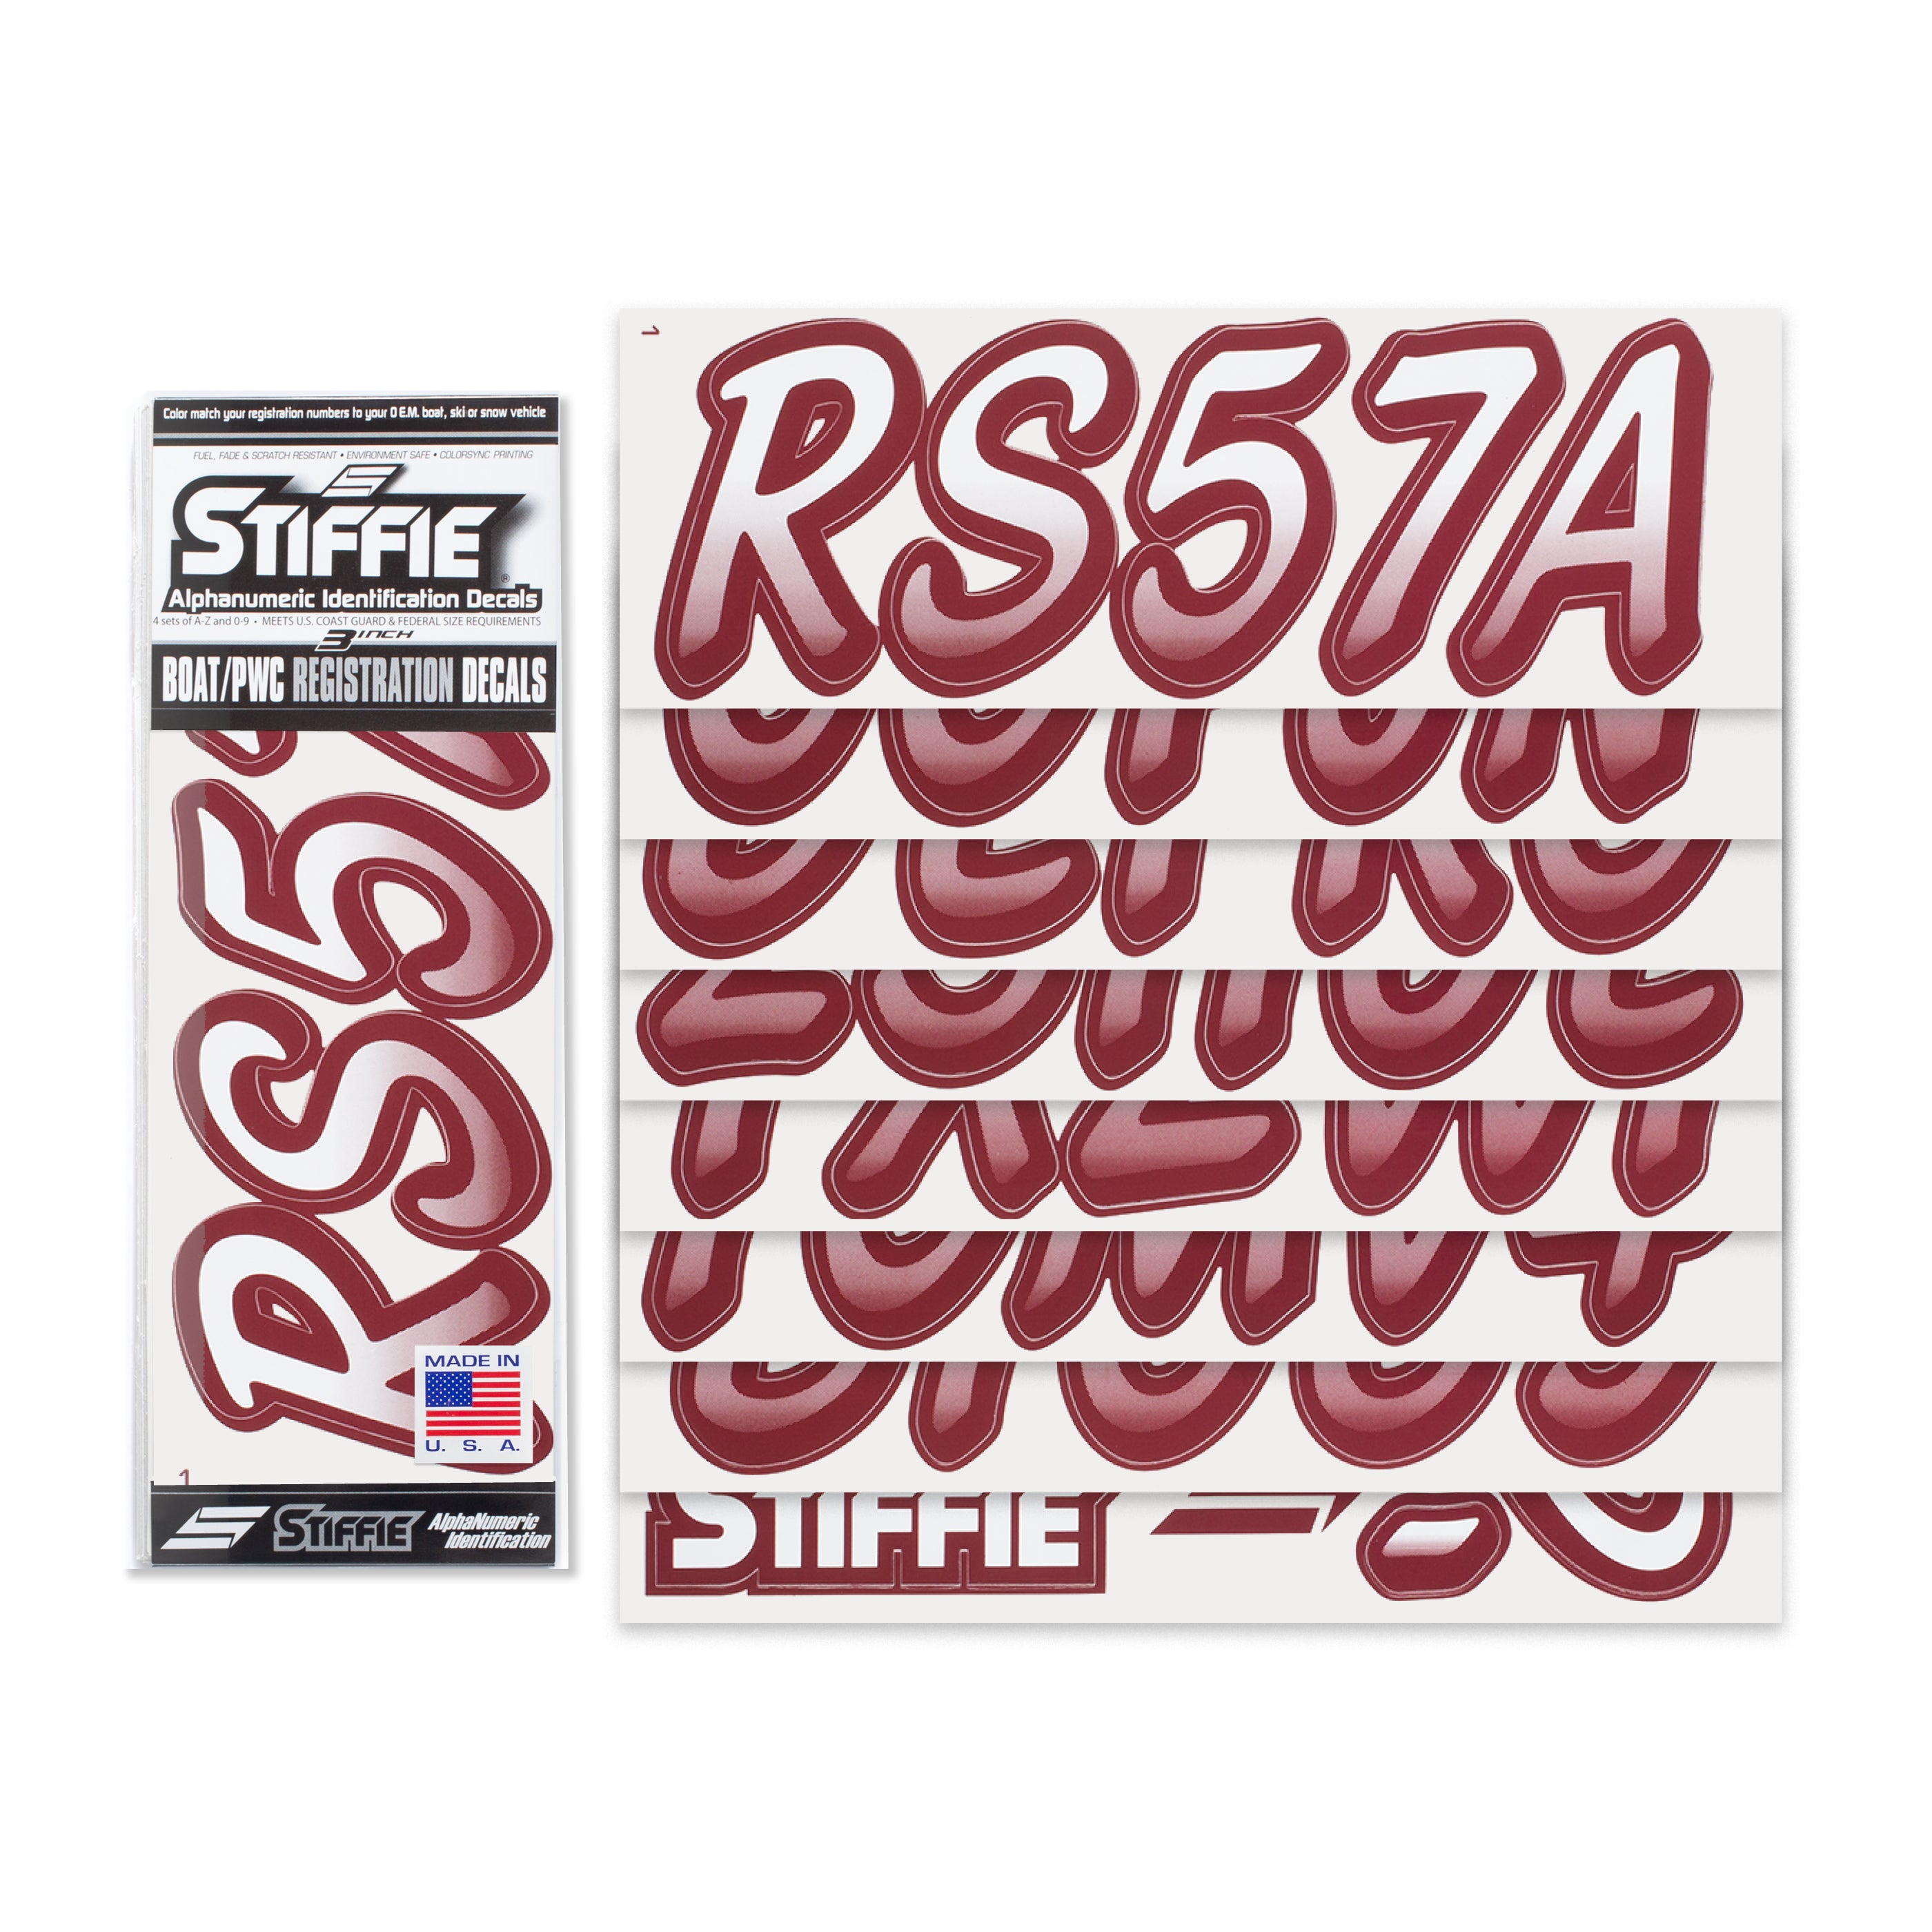 STIFFIE Whipline White / Wine 3" Alpha-Numeric Registration Identification Numbers Stickers Decals for Boats & Personal Watercraft